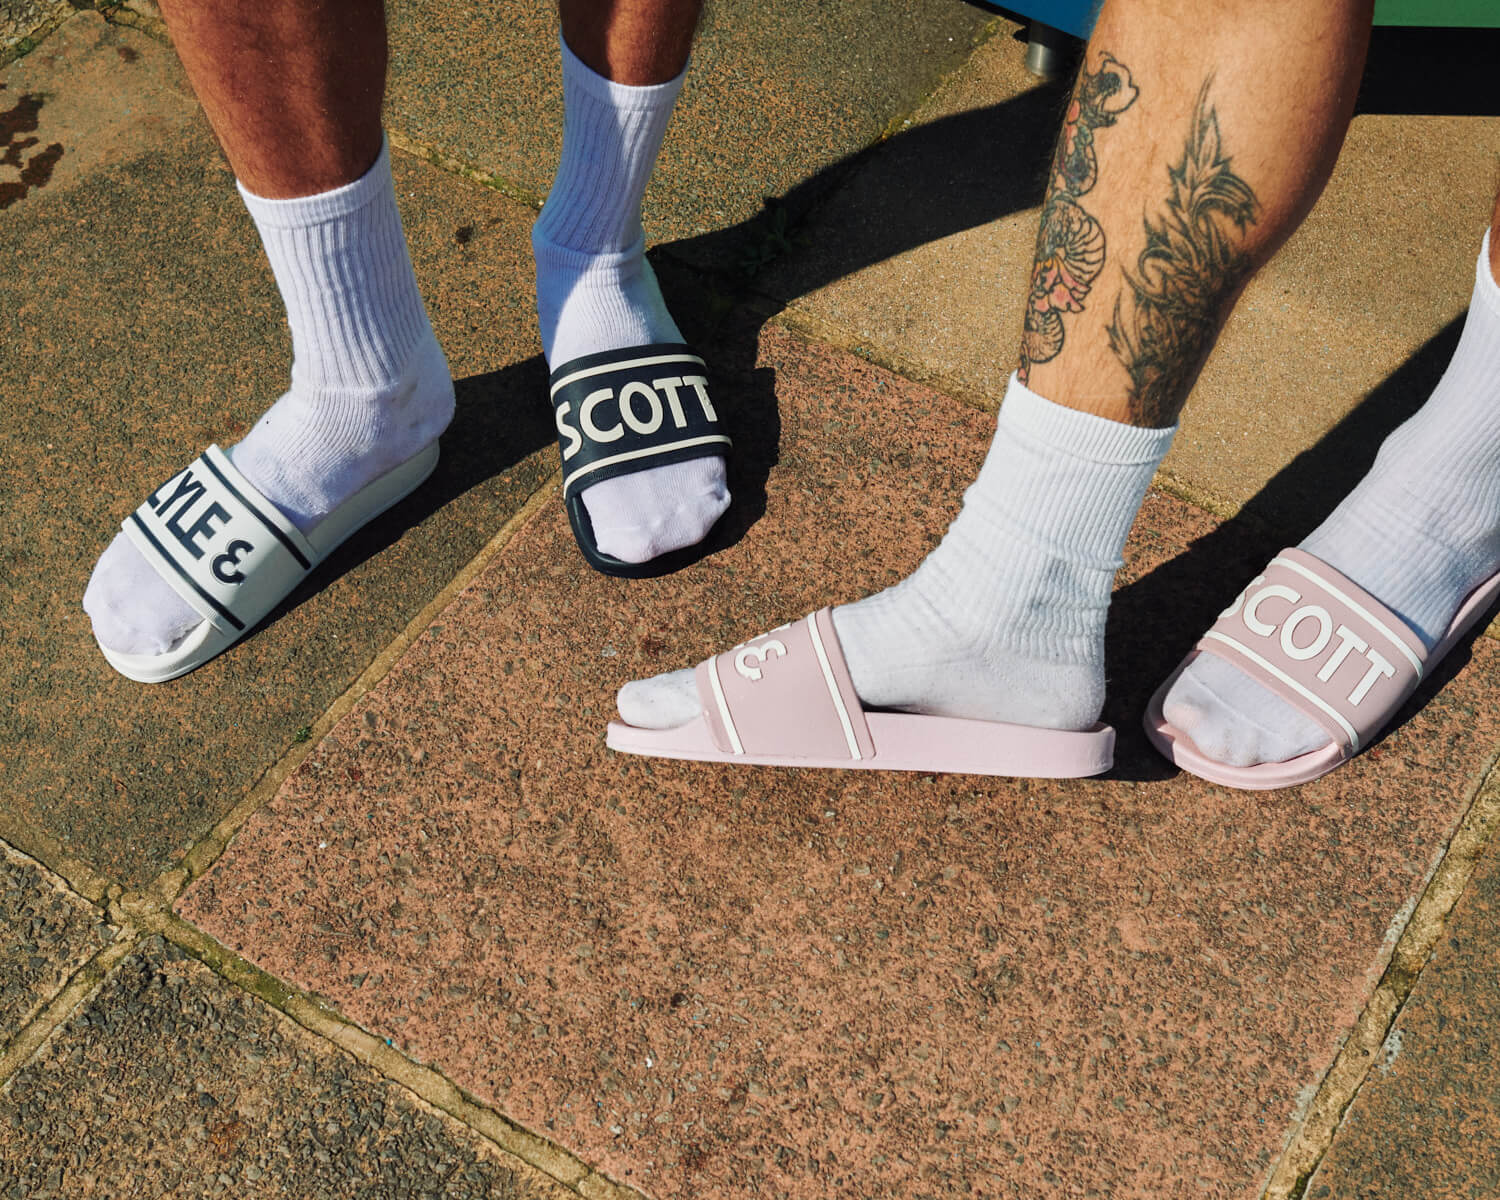 Lads in sliders on pavement by lifestyle photographer Tim Cole 